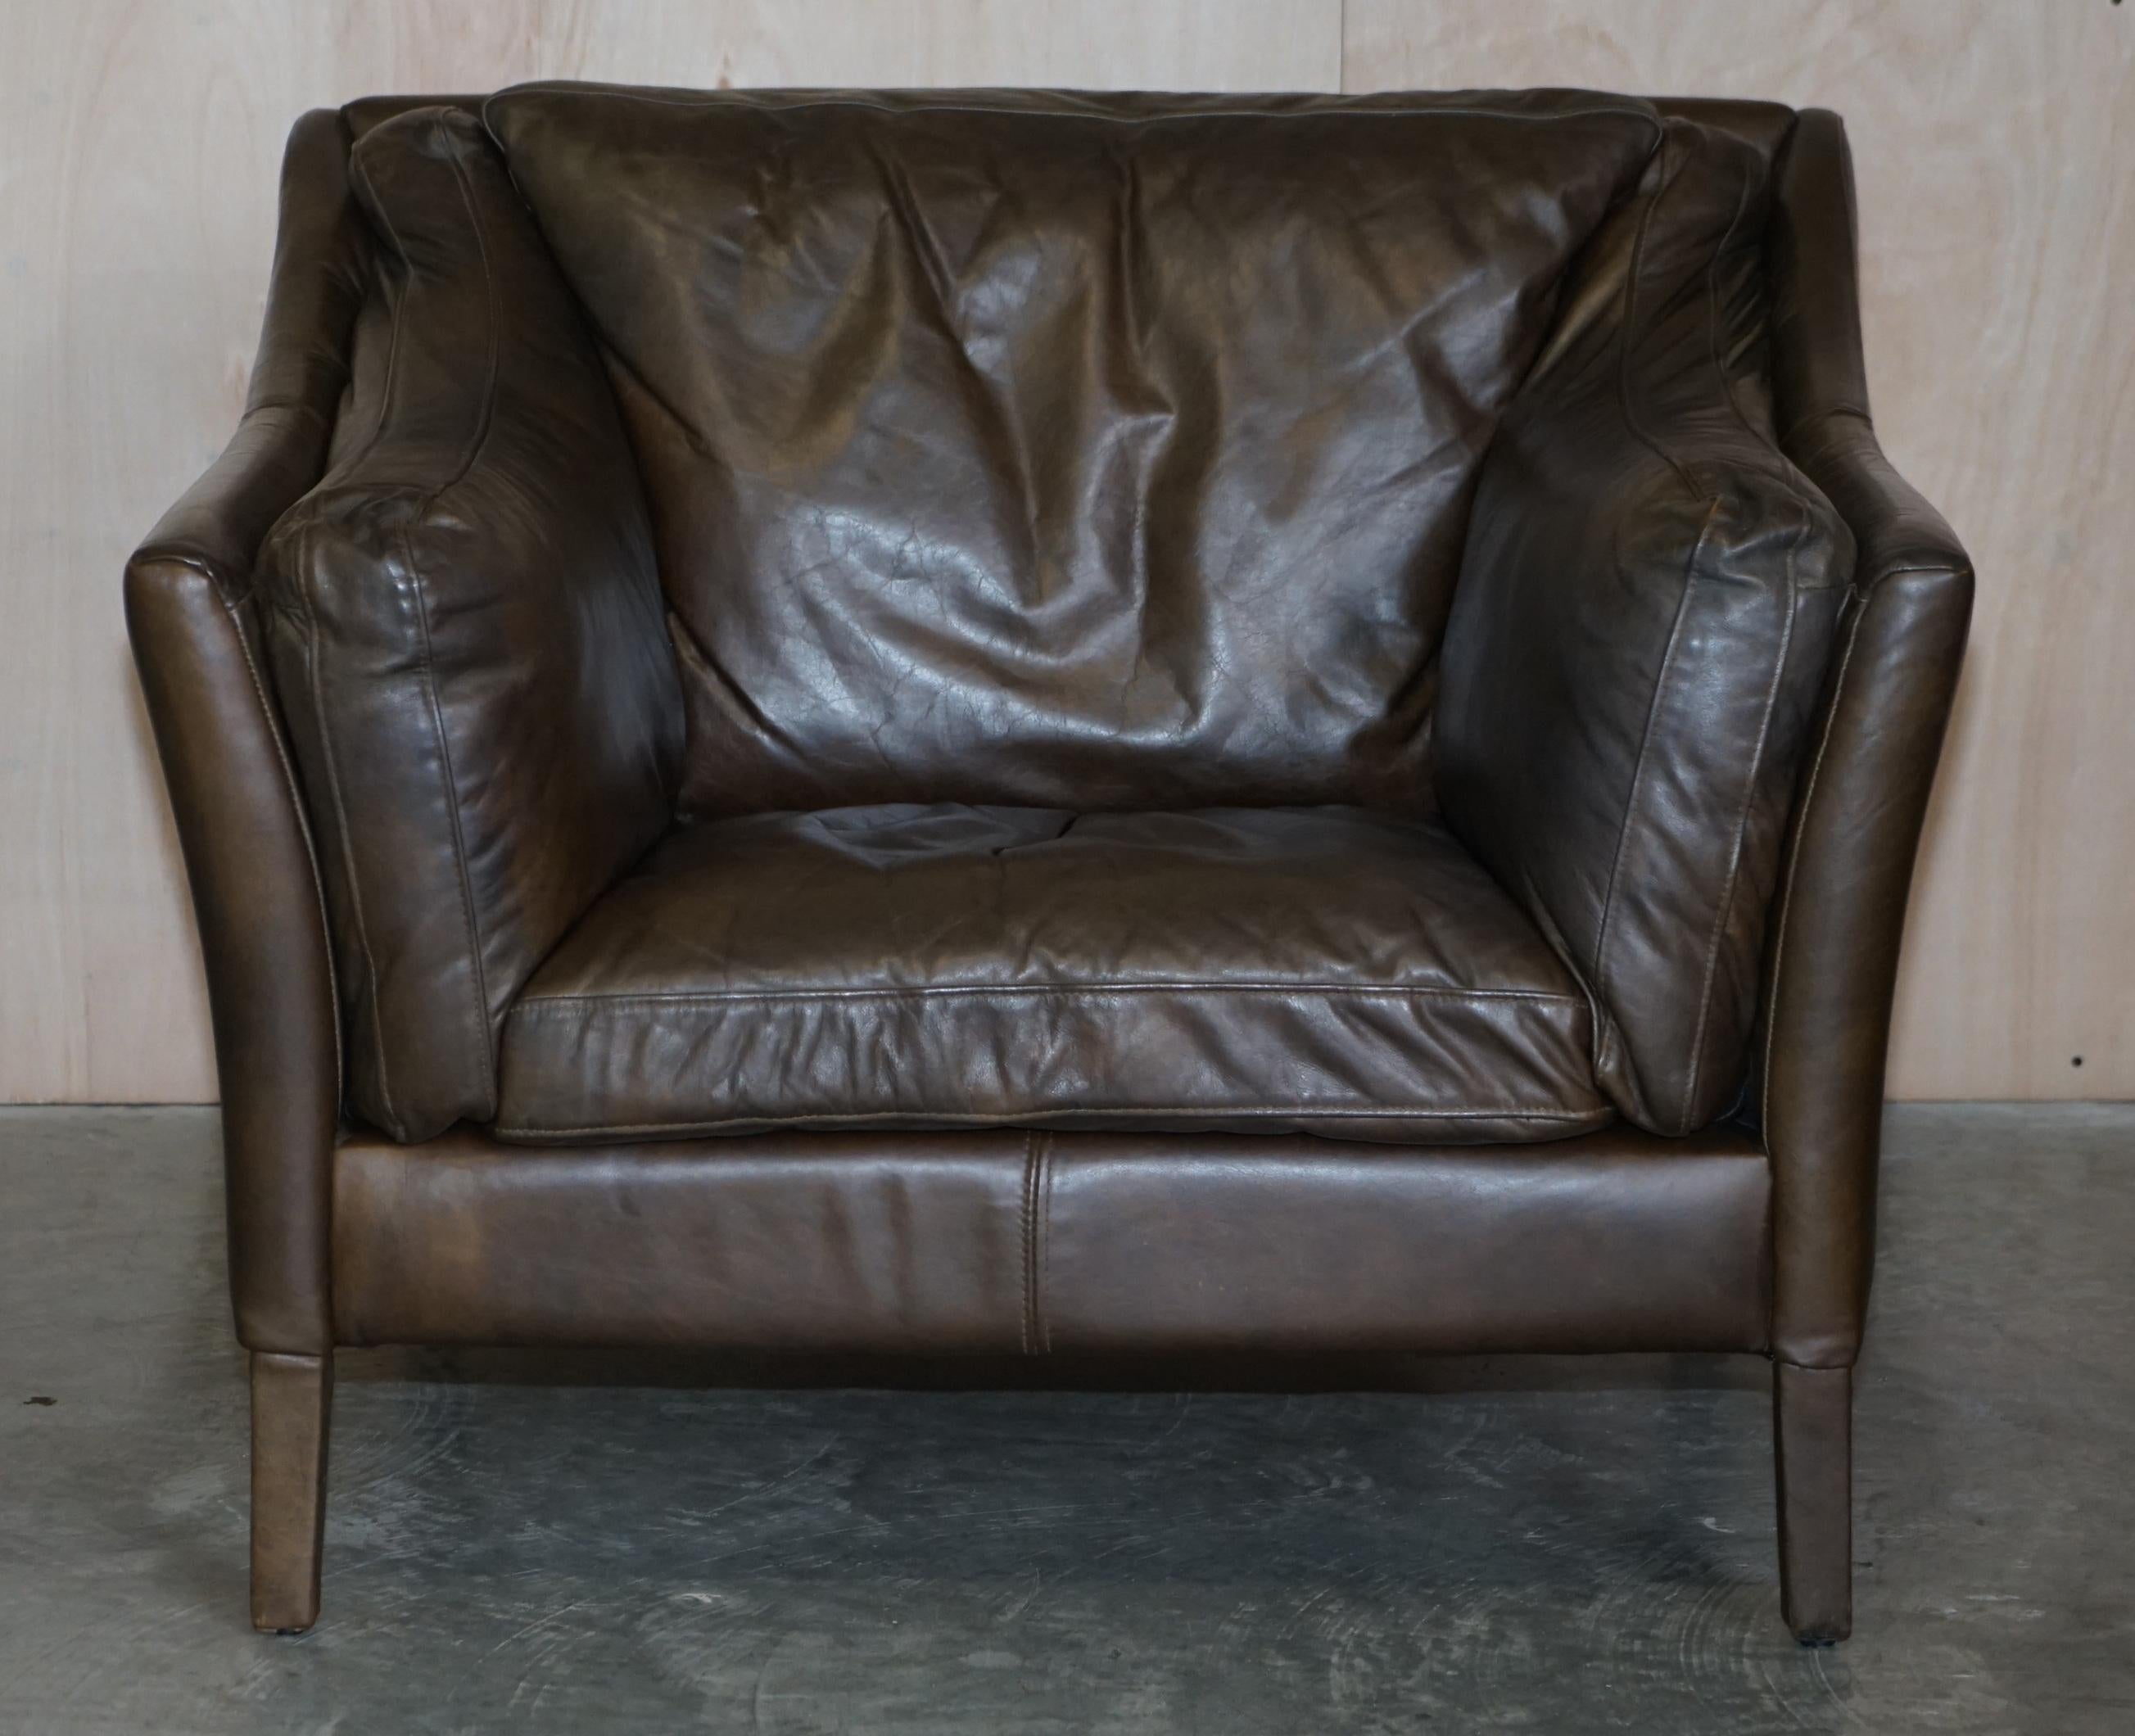 We are delighted to offer for sale this lovely, super comfortable Halo Reggio brown leather large armchair with the matching sofa also available

A very good looking and well made piece, I’ve had a variation of this armchair in my life for the